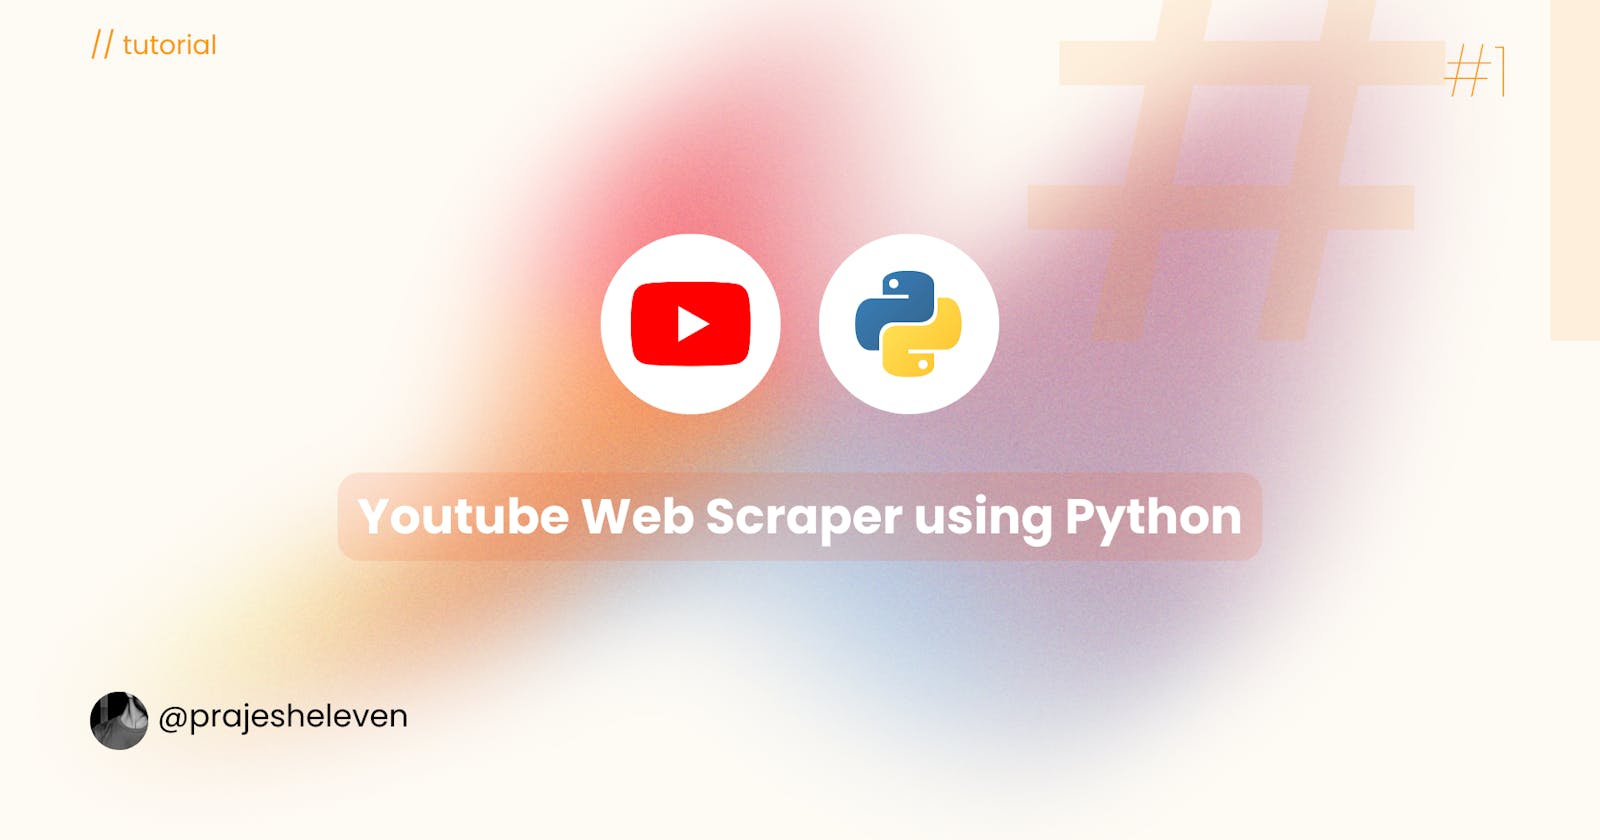 Building a YouTube Web Scraper with Python: Fetching Data Using YouTube Data API and Saving to CSV with Pandas